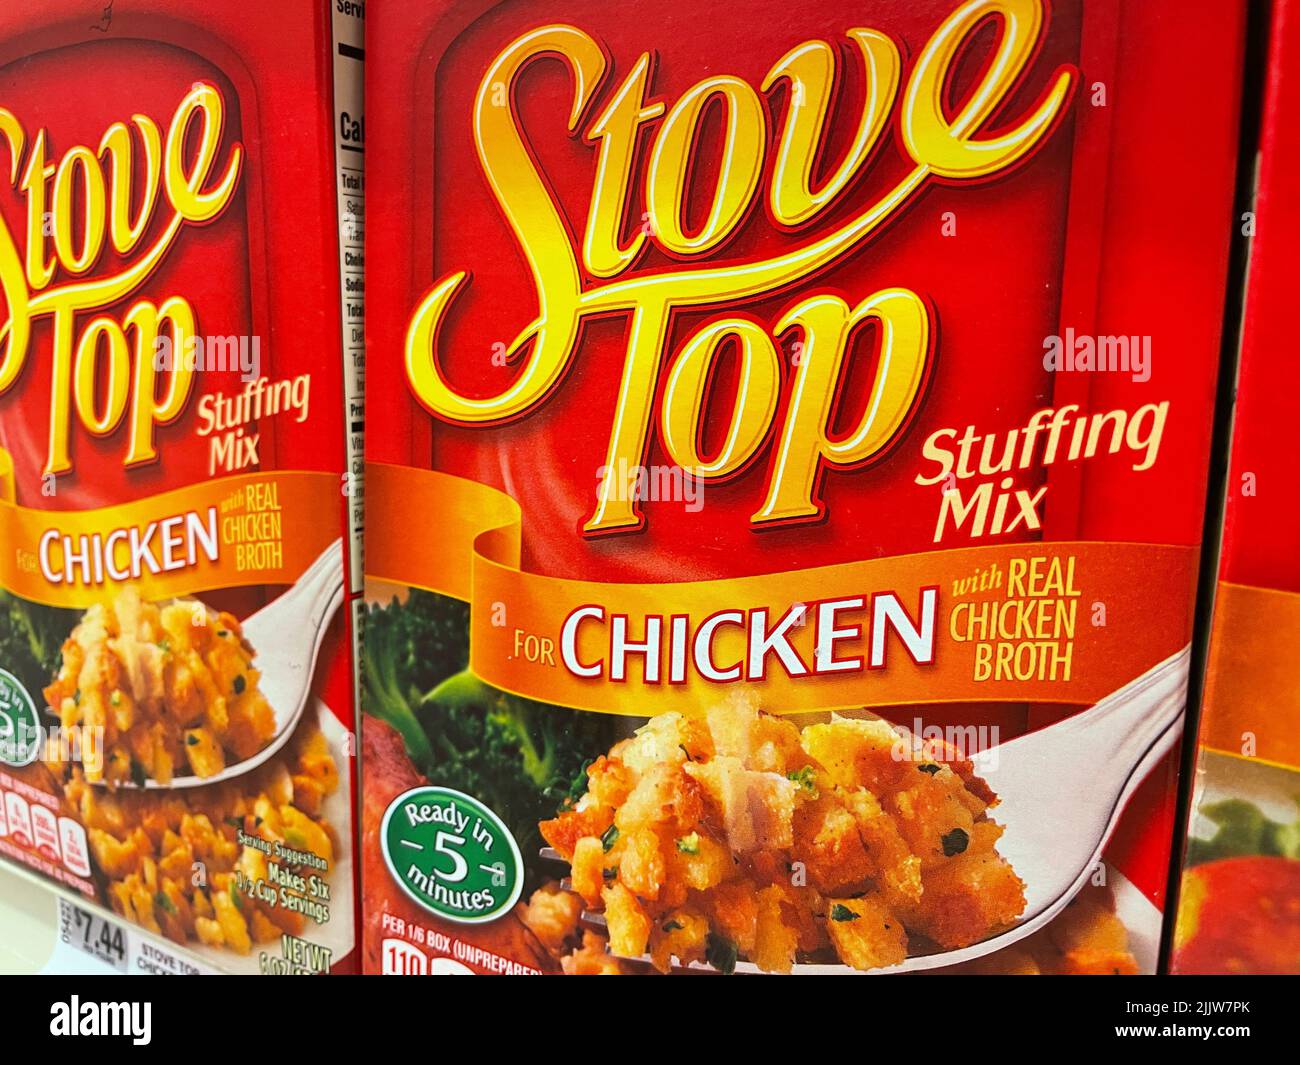 Stove Top Stuffing Mix For Chicken 6oz